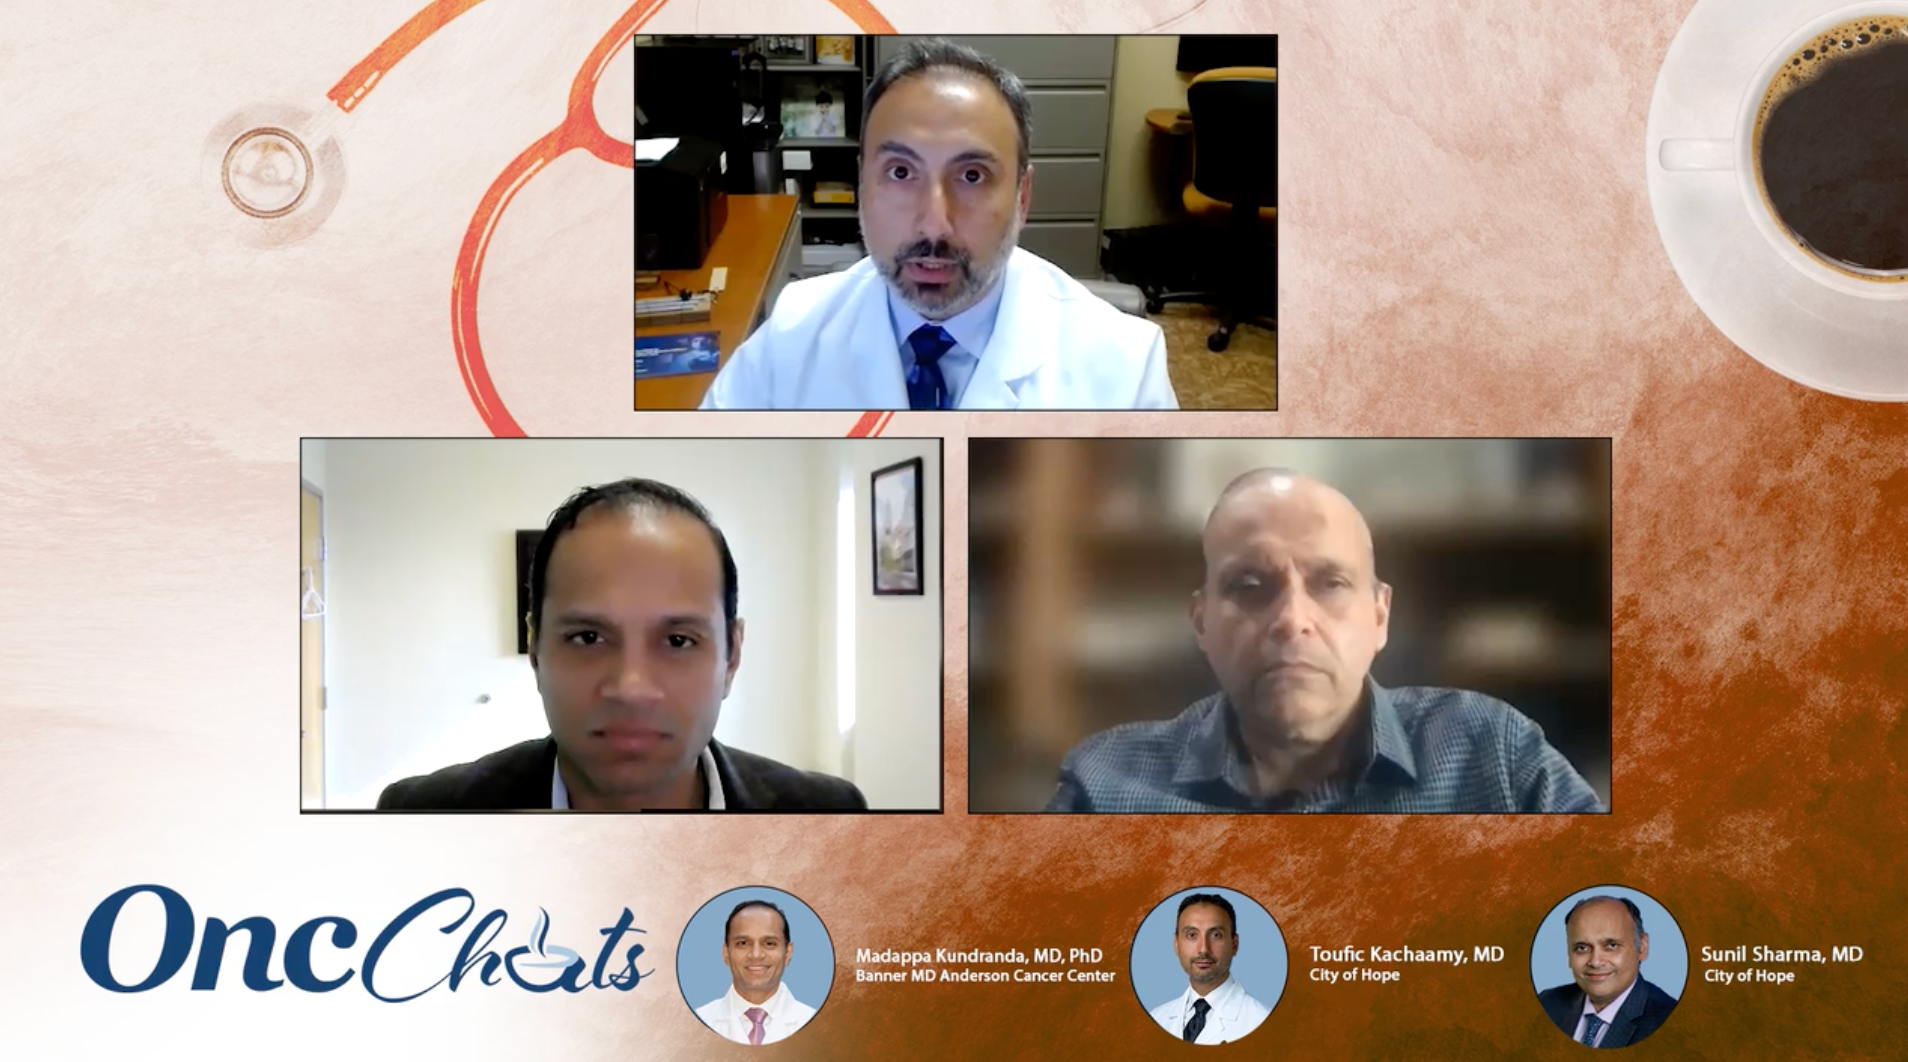 In this first episode of OncChats: Leveraging Immunotherapy in GI Malignancies, Toufic Kachaamy, MD, of City of Hope, Sunil Sharma, MD, of City of Hope, and Madappa Kundranda, MD, PhD, of Banner MD Anderson Cancer Center, discuss the potential for early detection multiomic assays and the work that still needs to be done to encourage their widespread use.